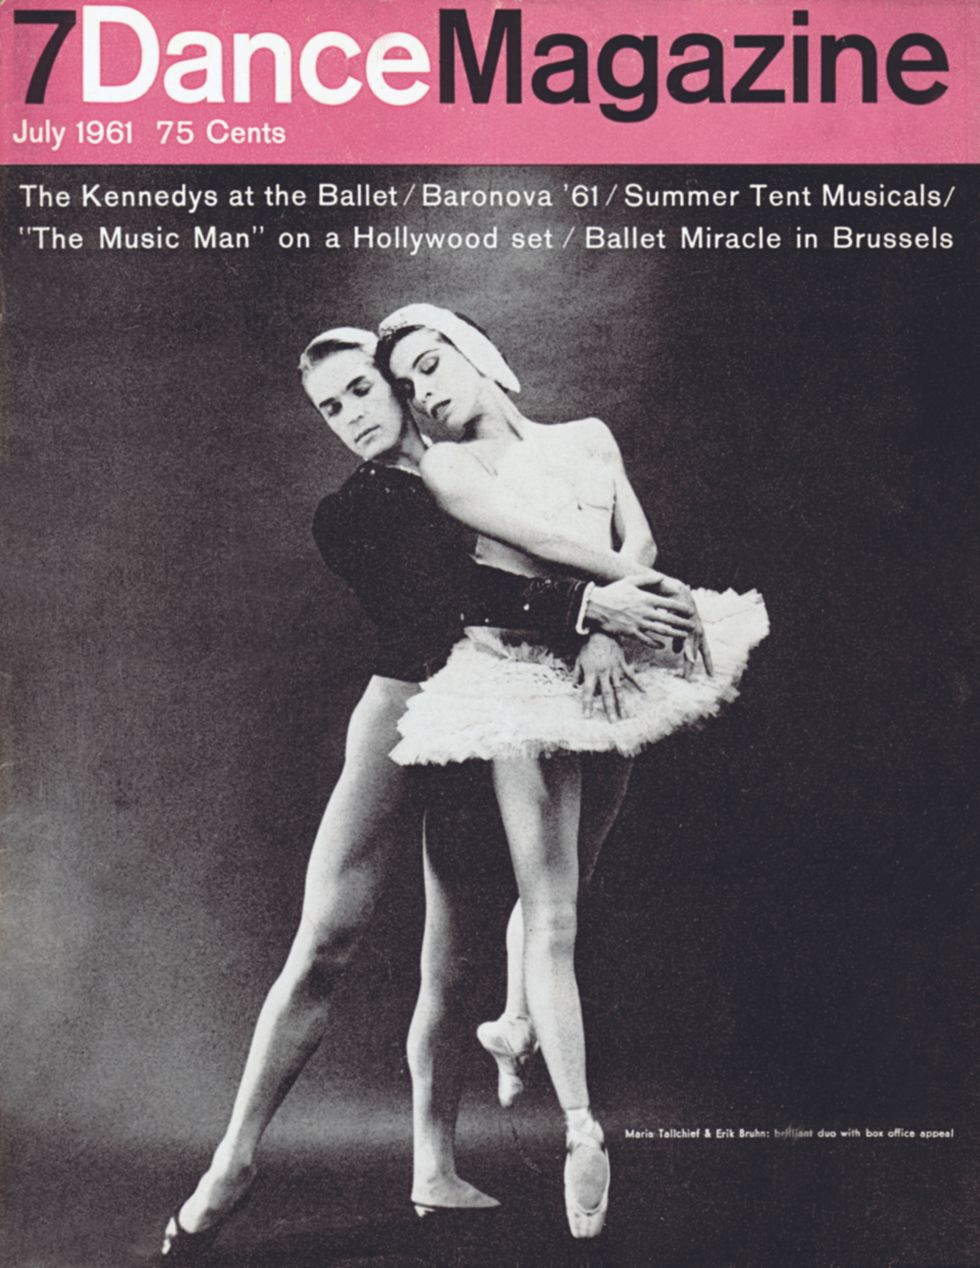 On the cover of Dance Magazine, Maria Tallchief and Erik Bruhn pose together in costume as Odette and Siegfried. The banner reads "Dance Magazine, July 1961, 75 cents."